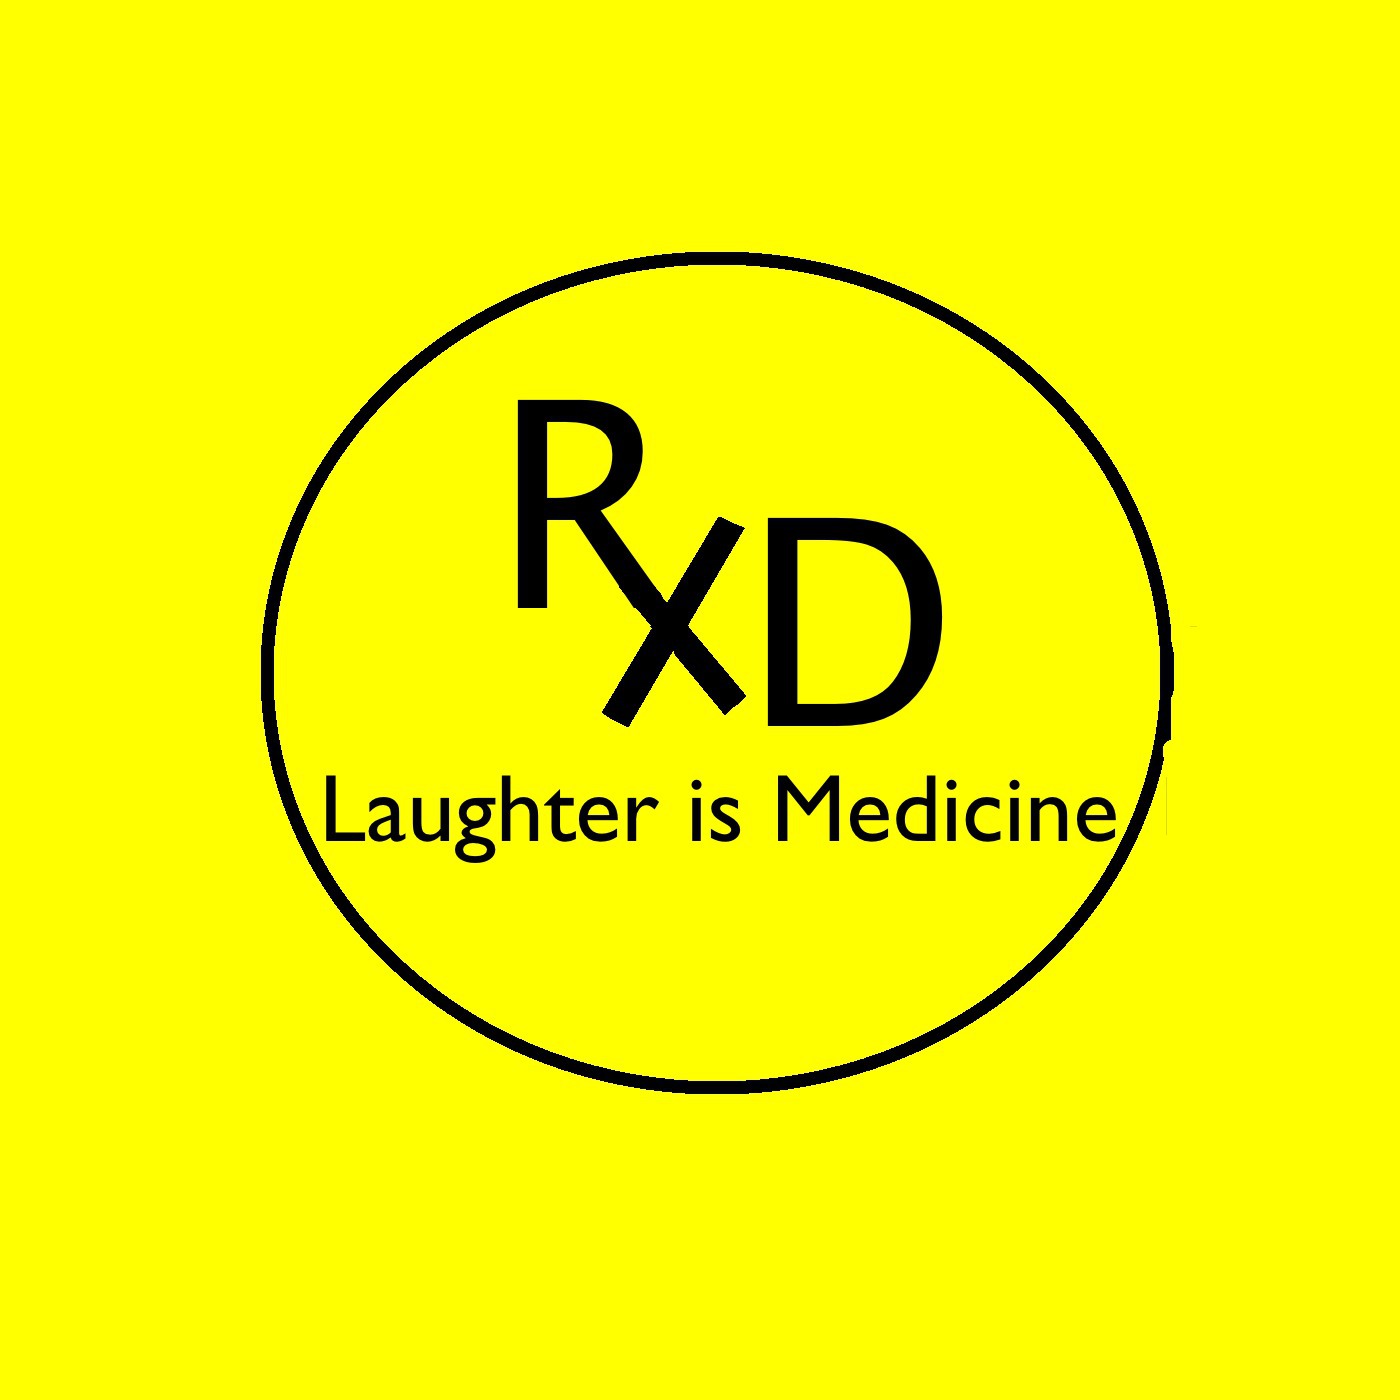 Laughter is Medicine